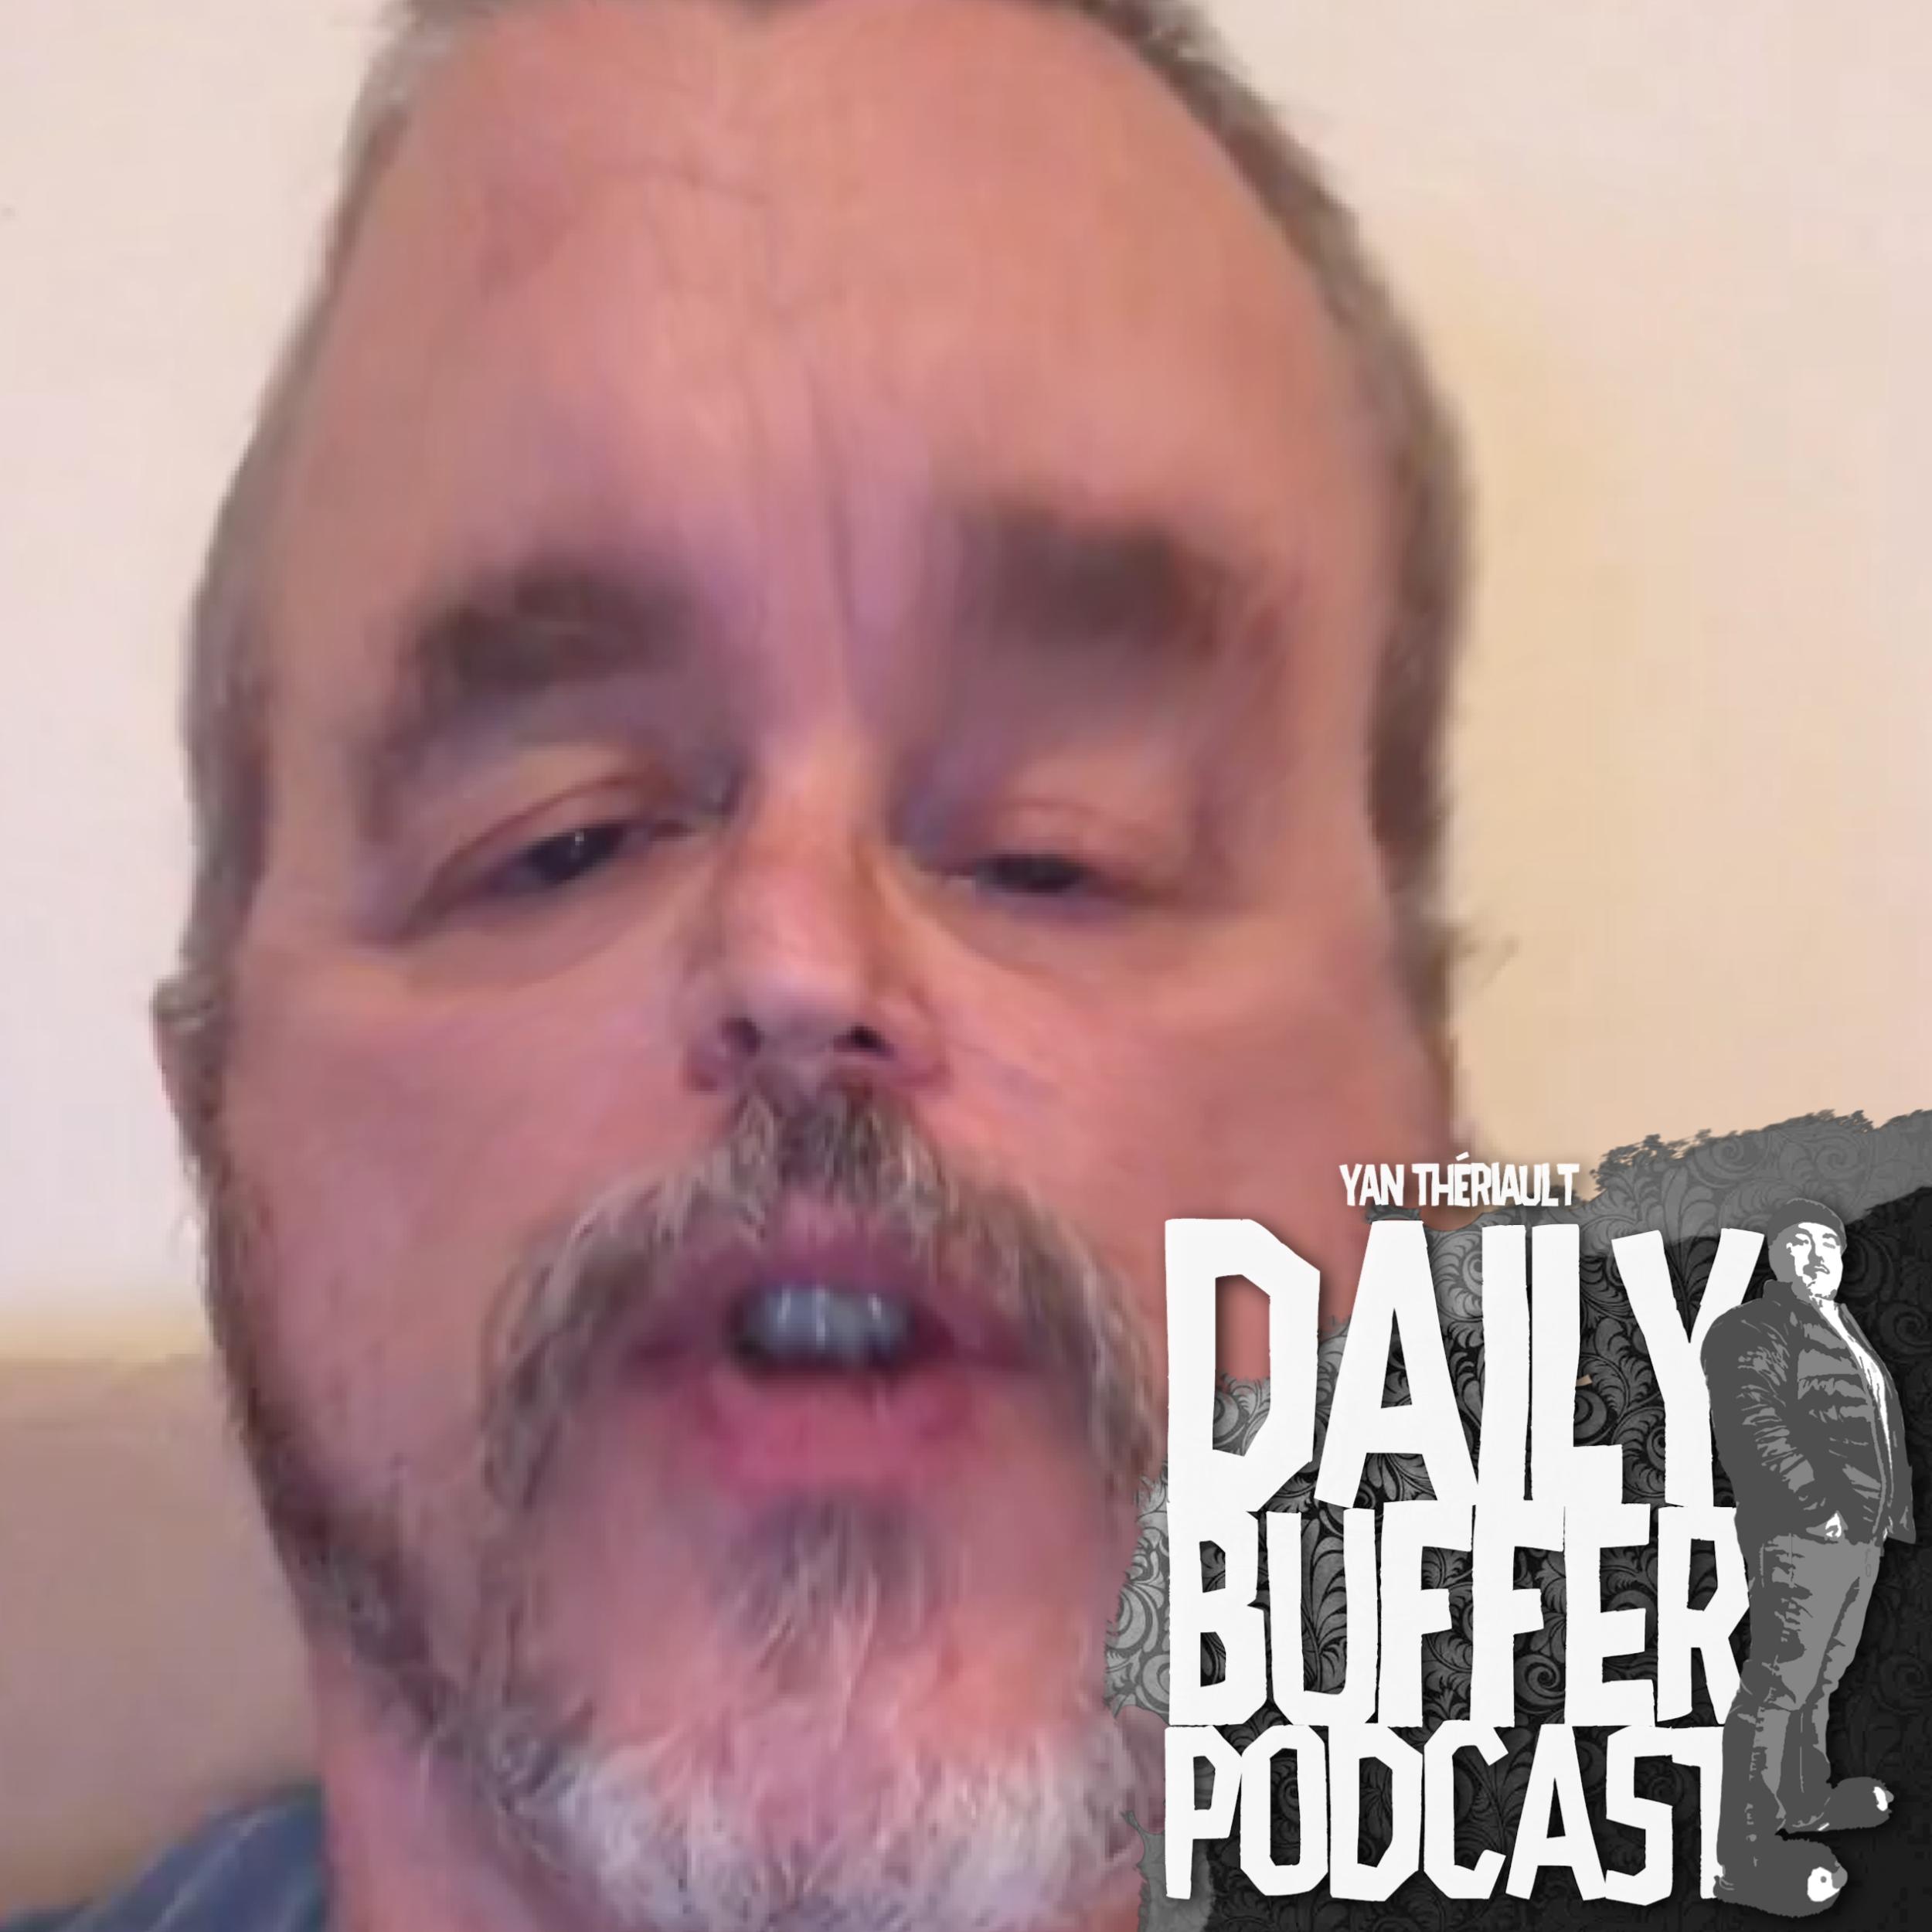 Dan Bigras is CANCELED!! - Le Daily Buffer Podcast - 2020 07 17